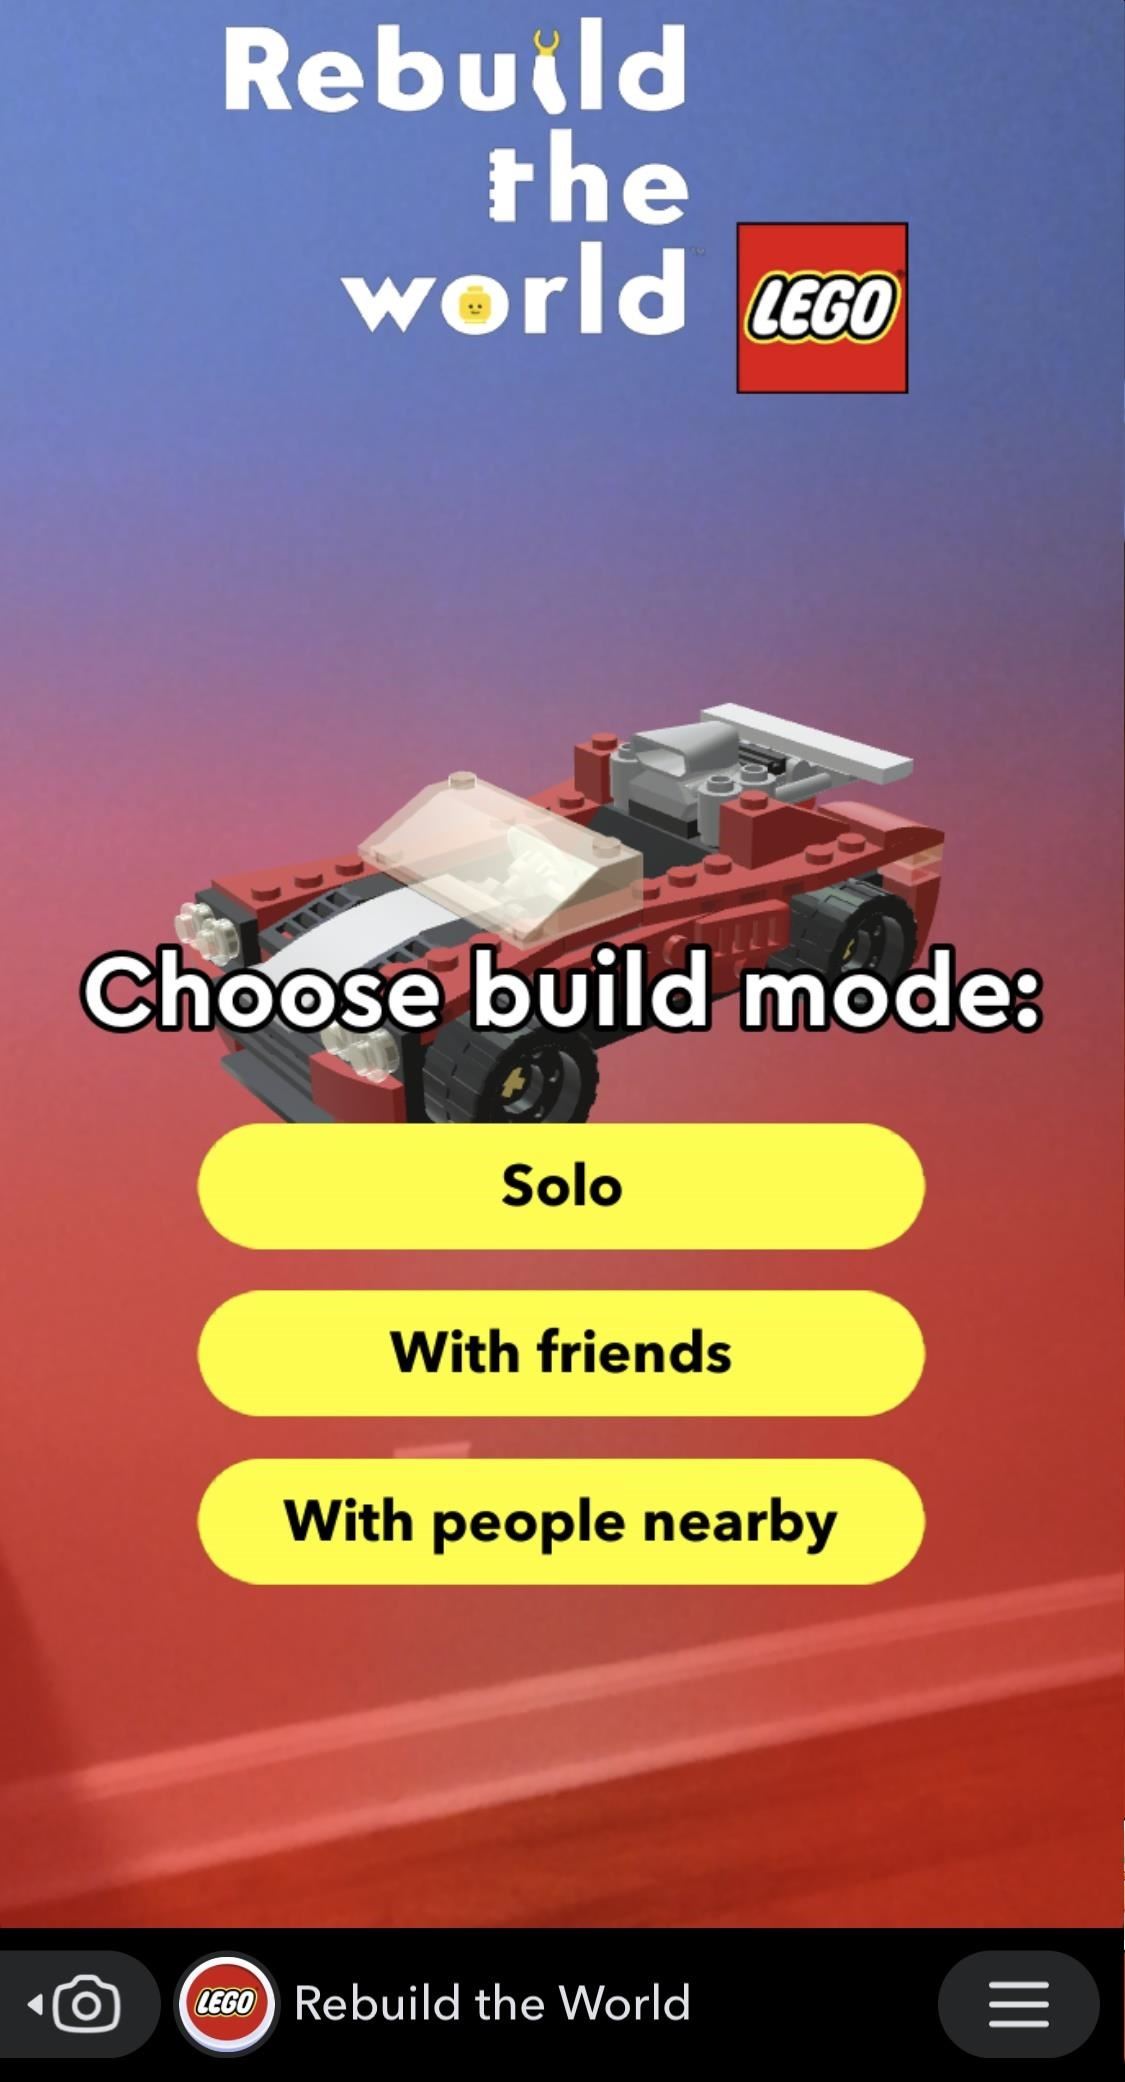 Hands-On with the Lego Snapchat Augmented Reality Experience That Lets You Build With Friends Remotely